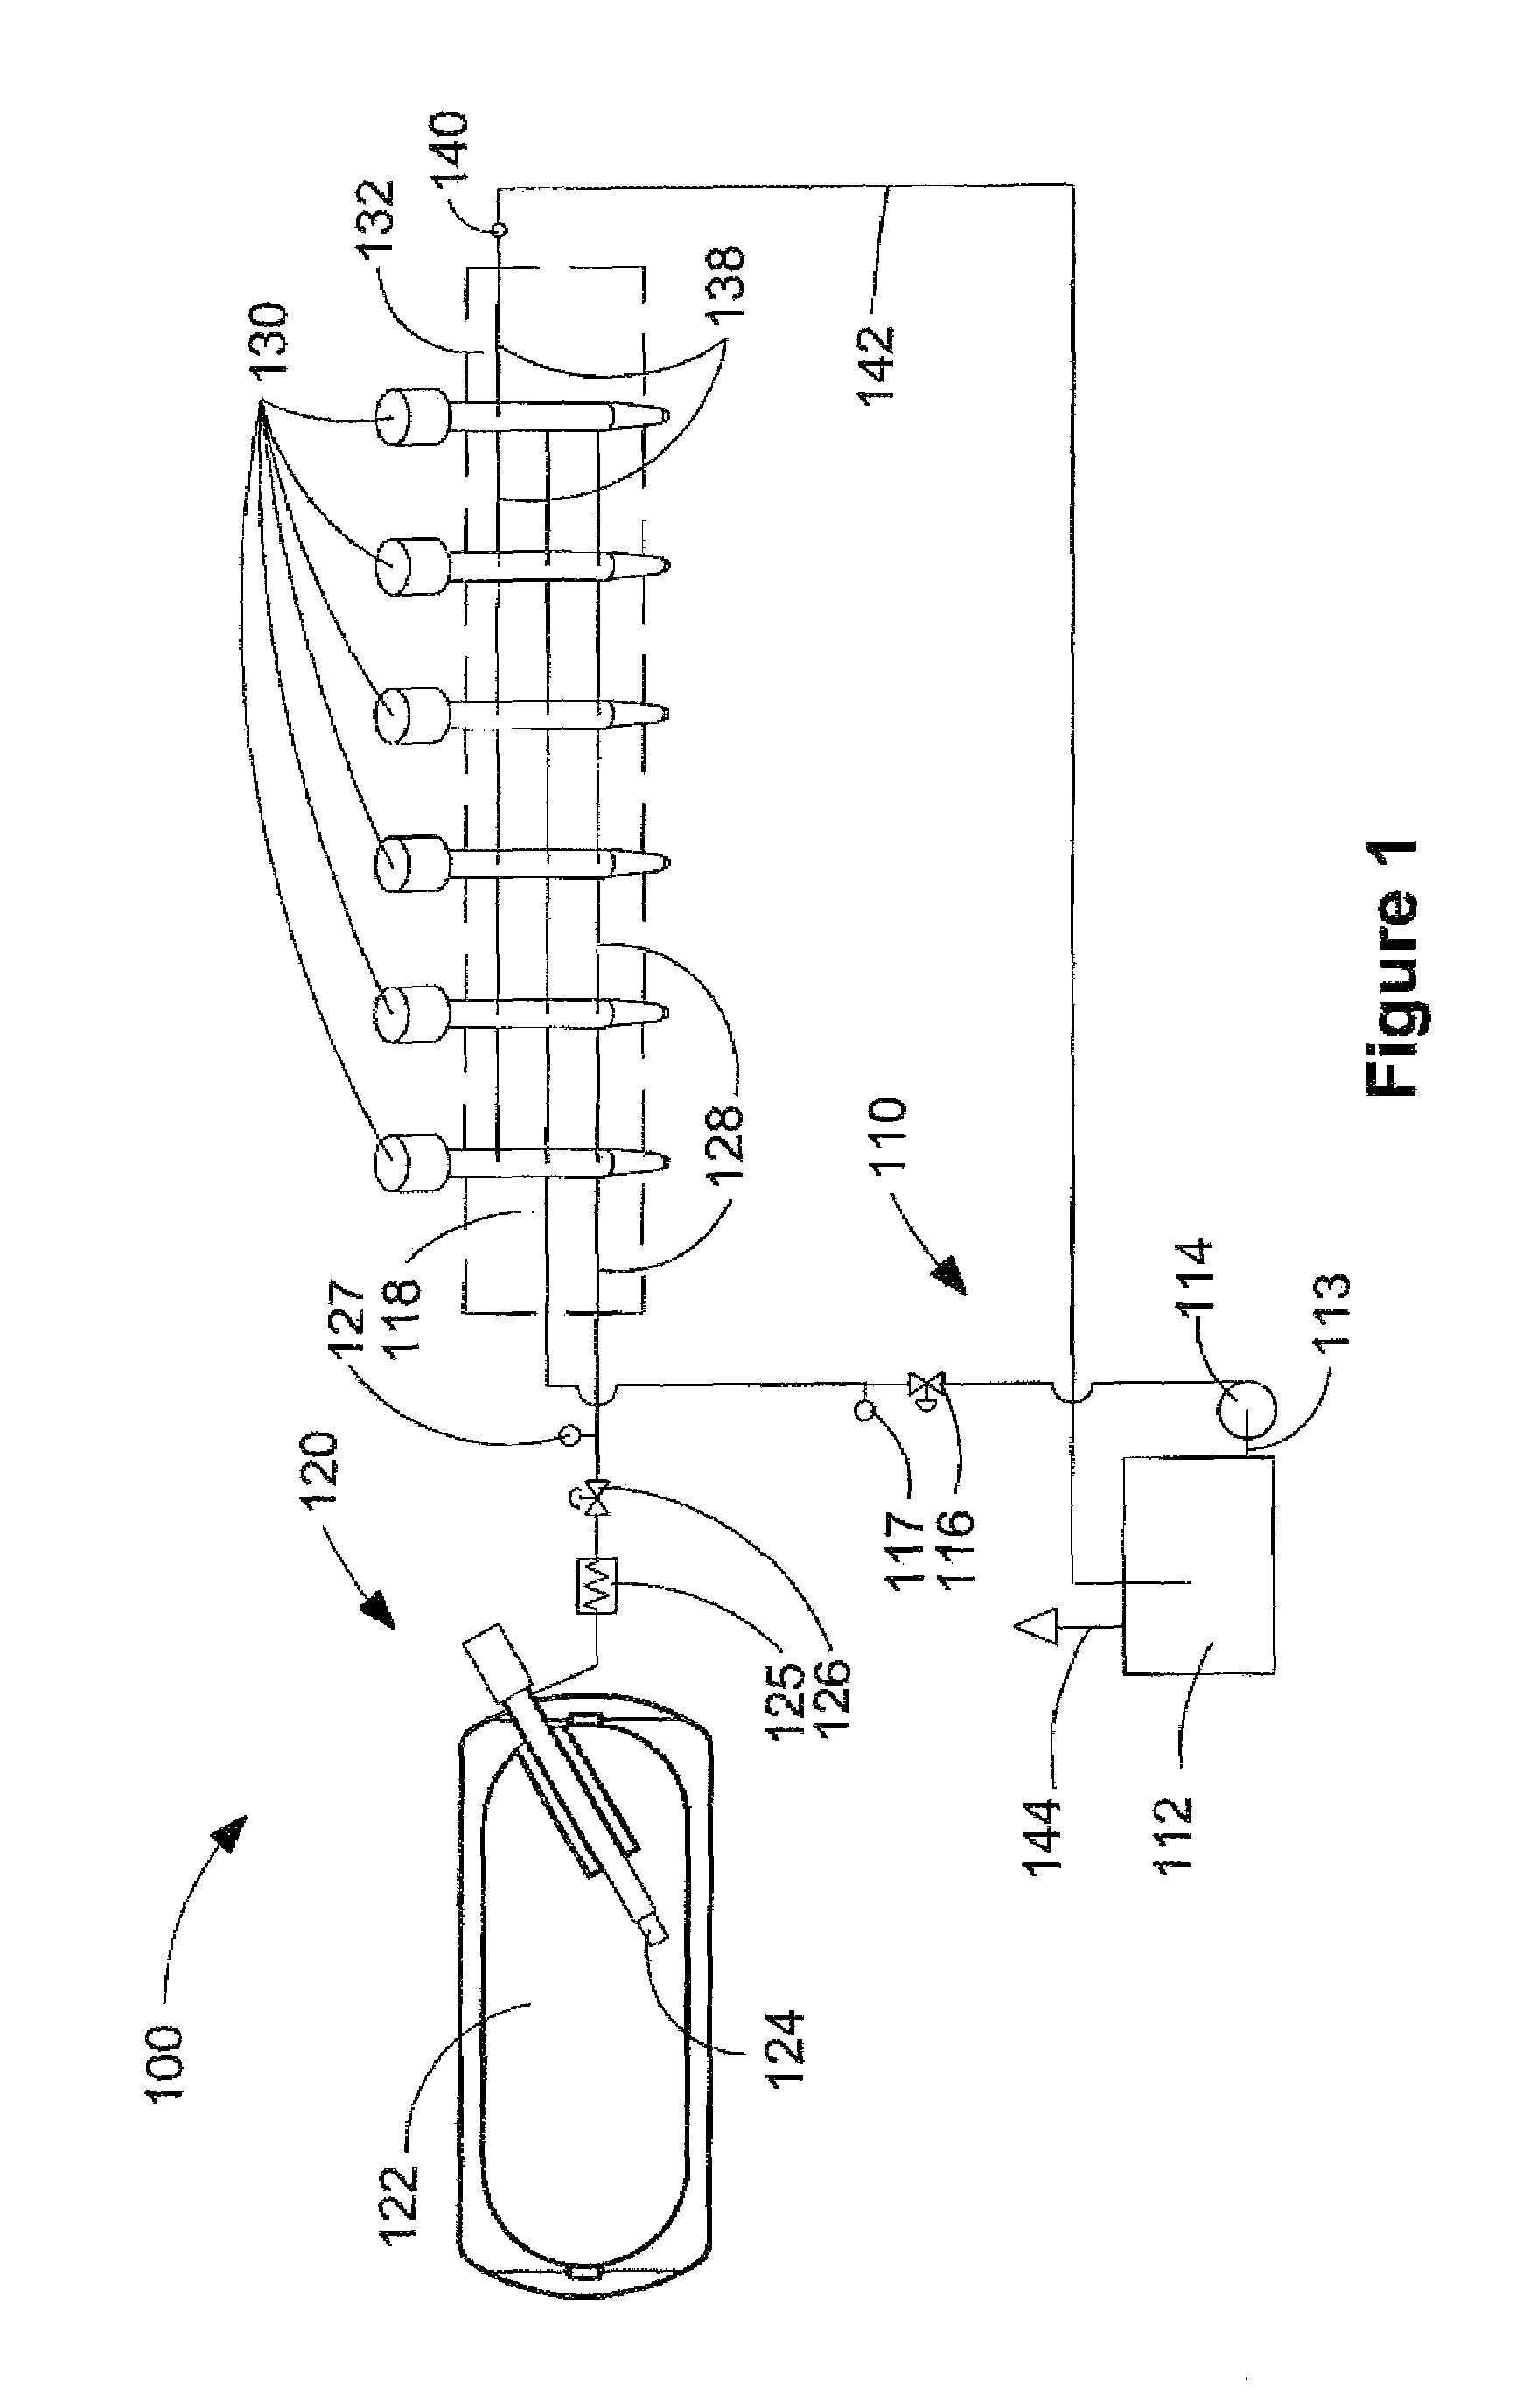 Method and apparatus for delivering two fuels to a direct injection internal combustion engine